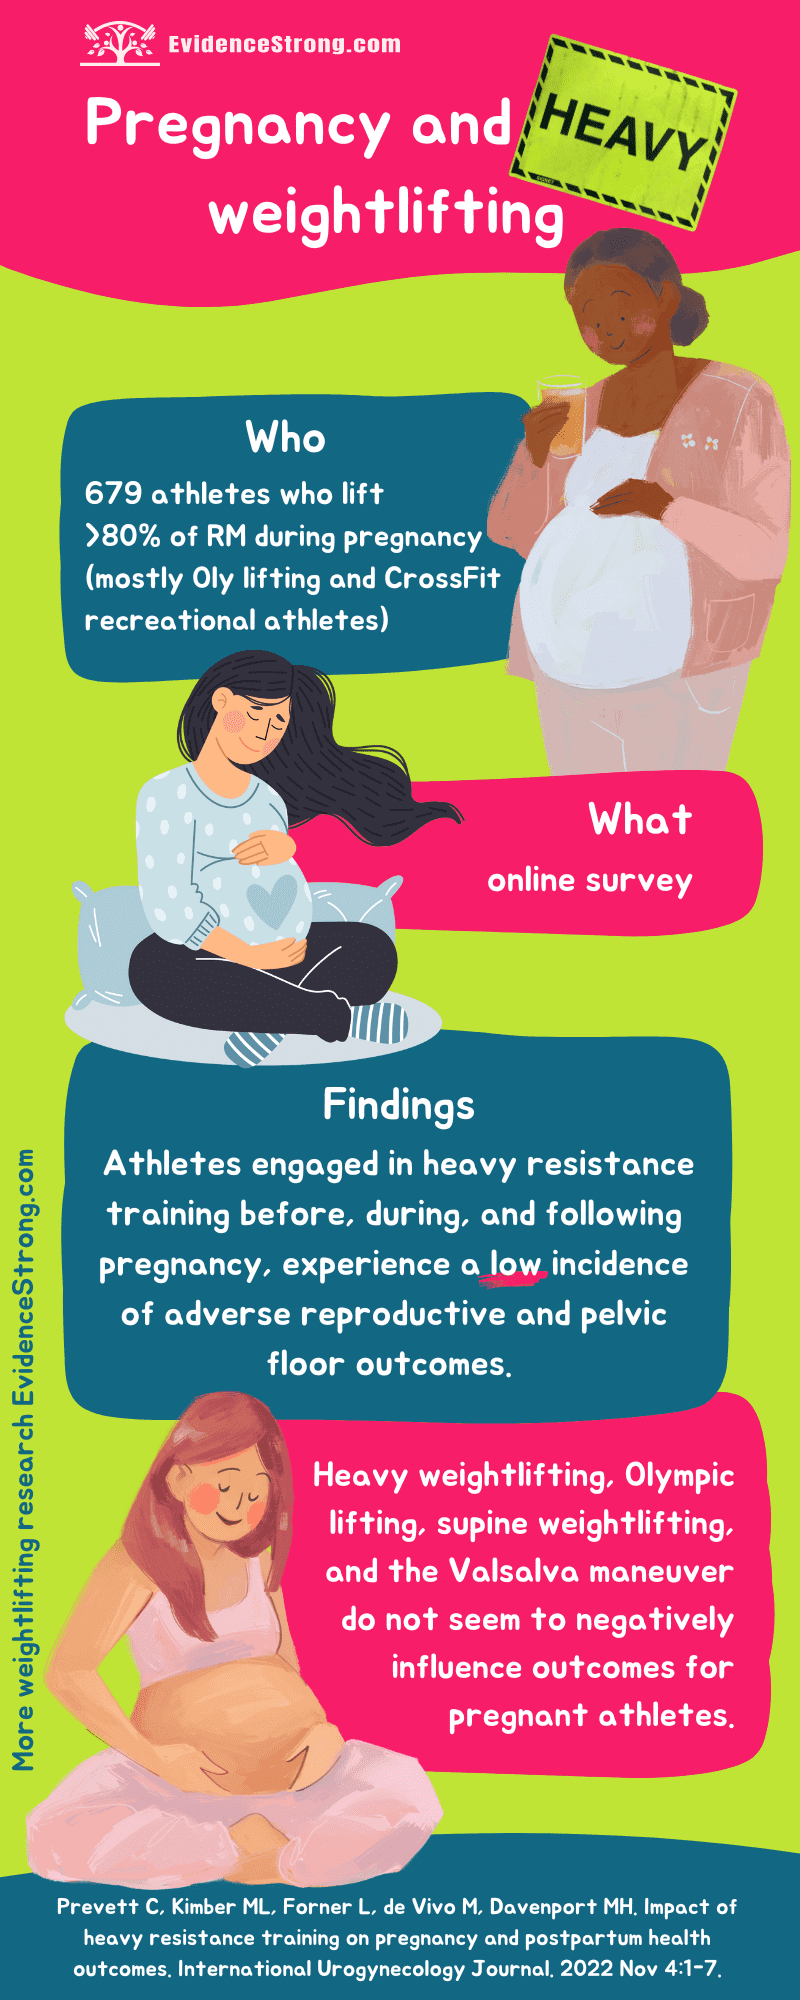 What is the impact of heavy weightlifting and Valsalva maneuver on pregnancy? - Infographic